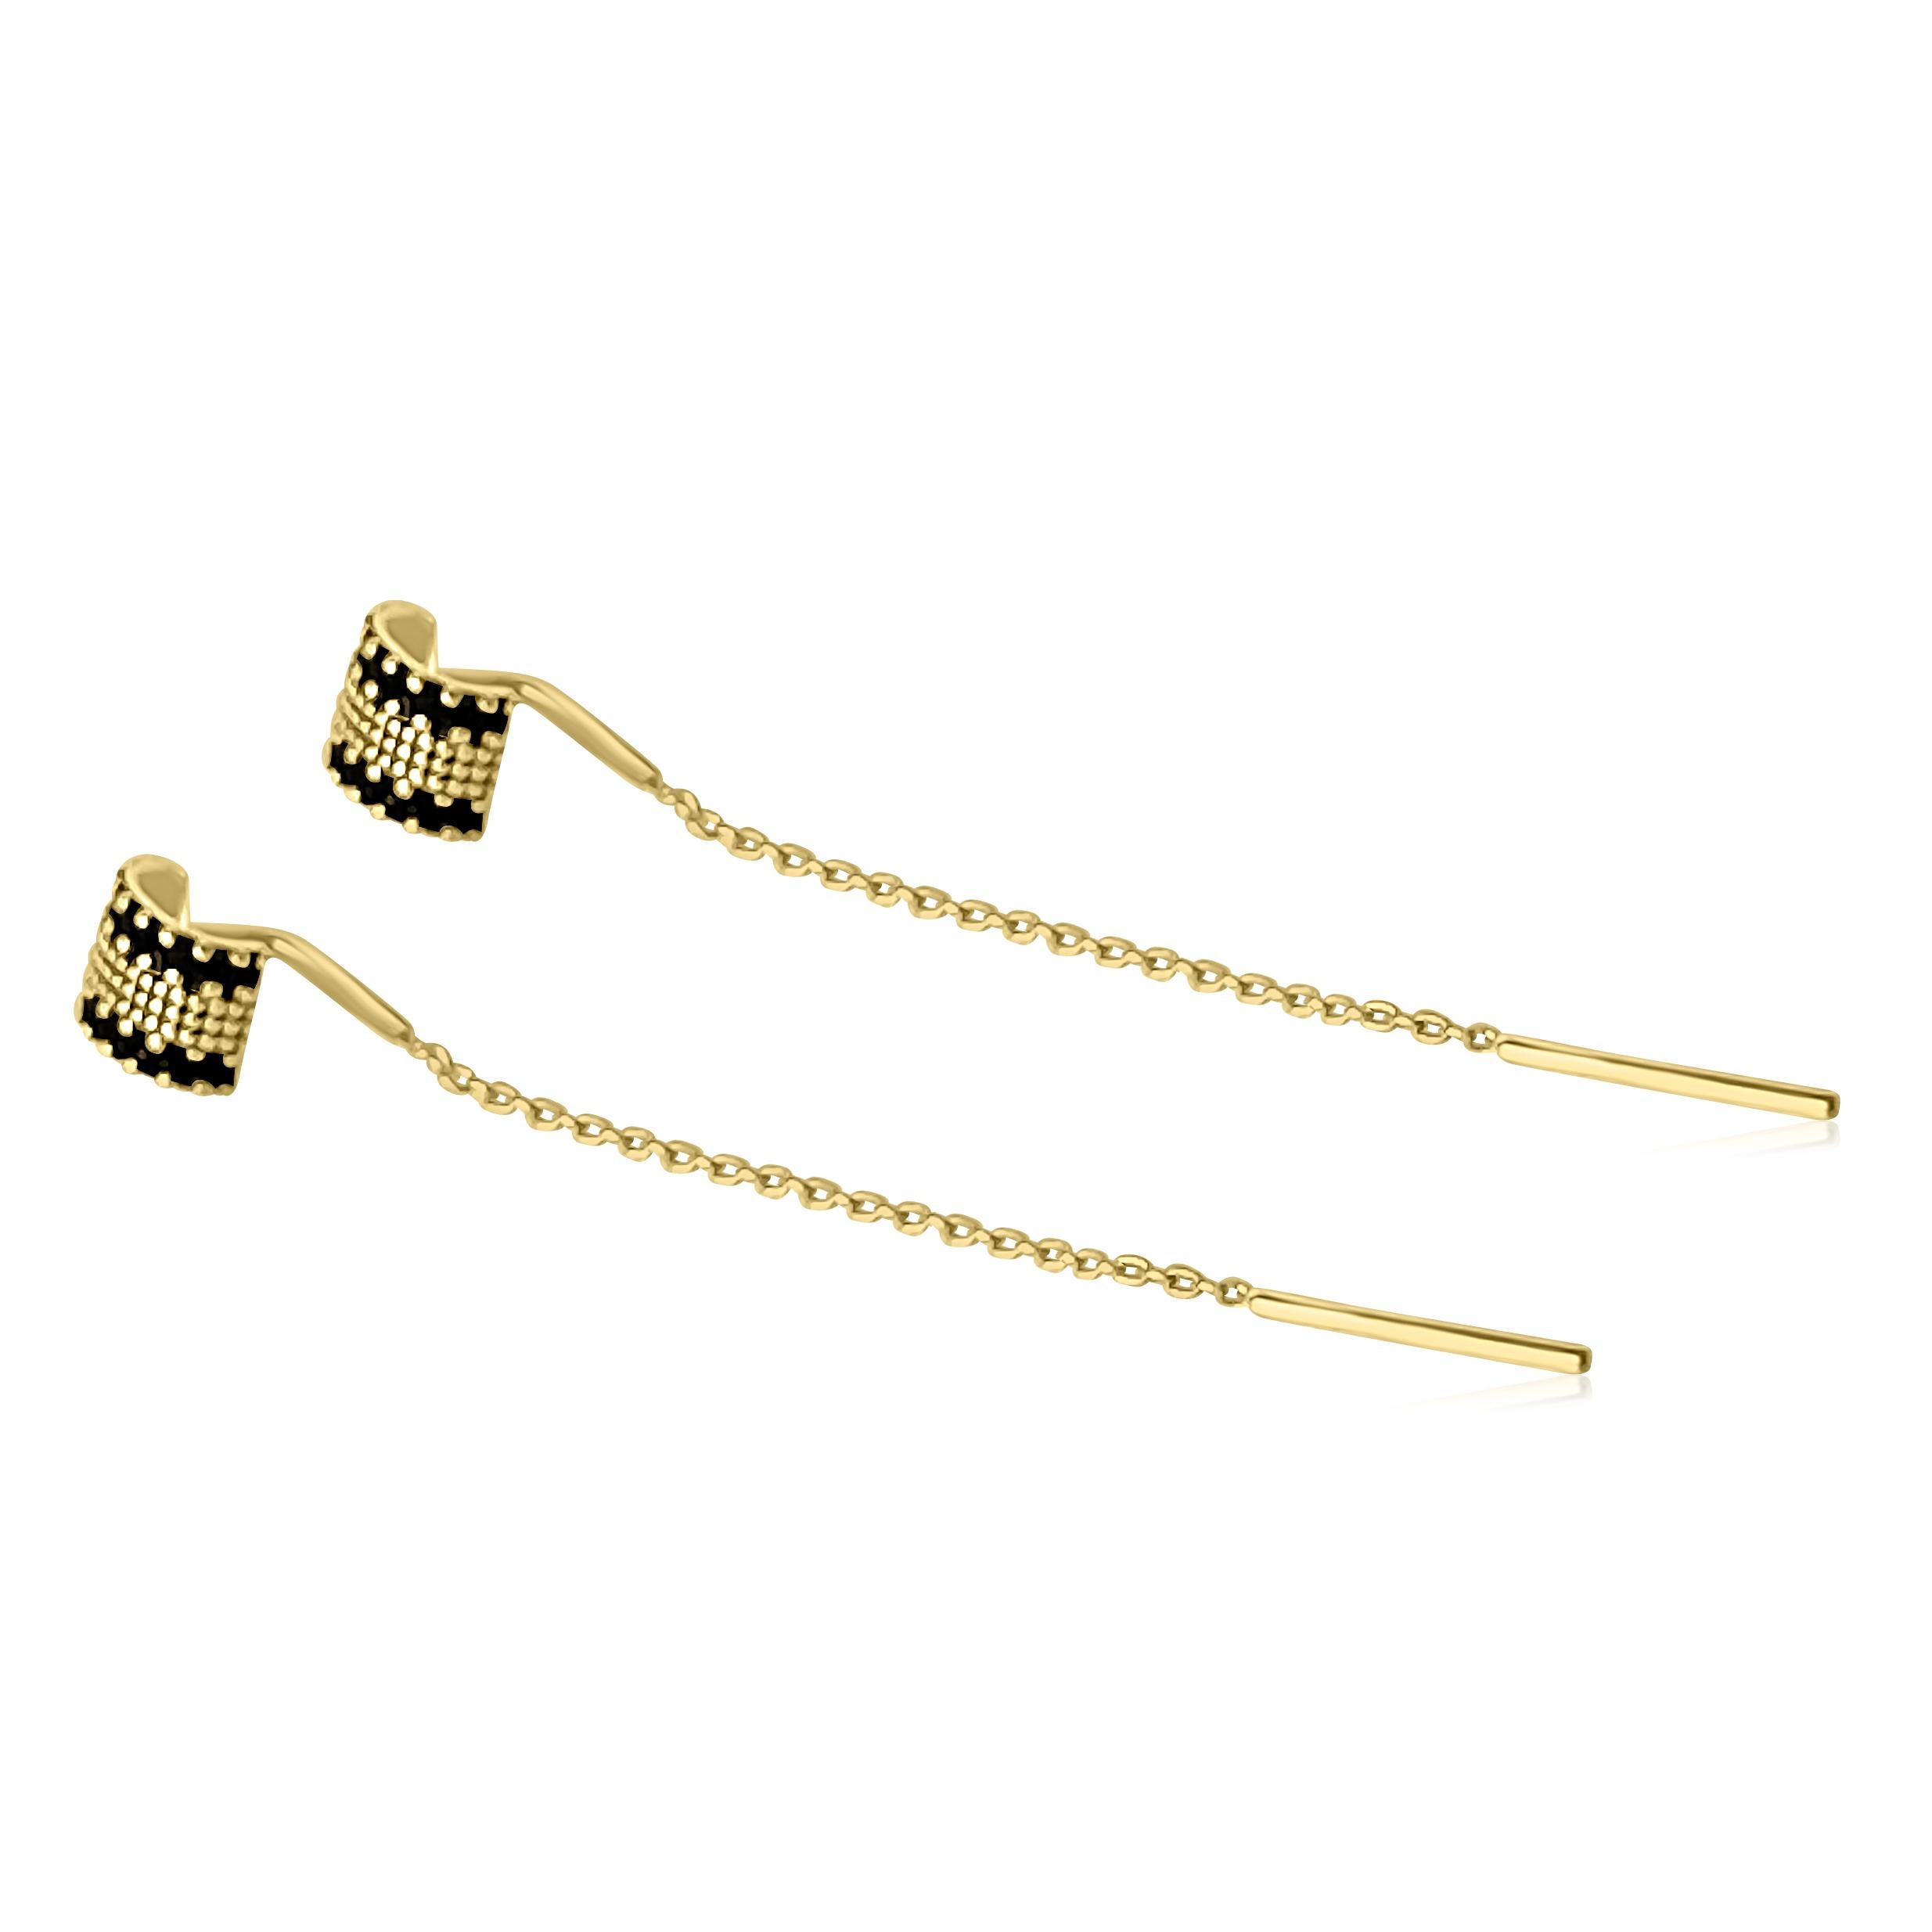 Part of the New Vintage collection, these earrings are the perfect match for the modern woman: luxurious, distinctive, and versatile.

Handcrafted from 14 karat solid yellow gold, these earrings feature black enamel with an intricate and exotic